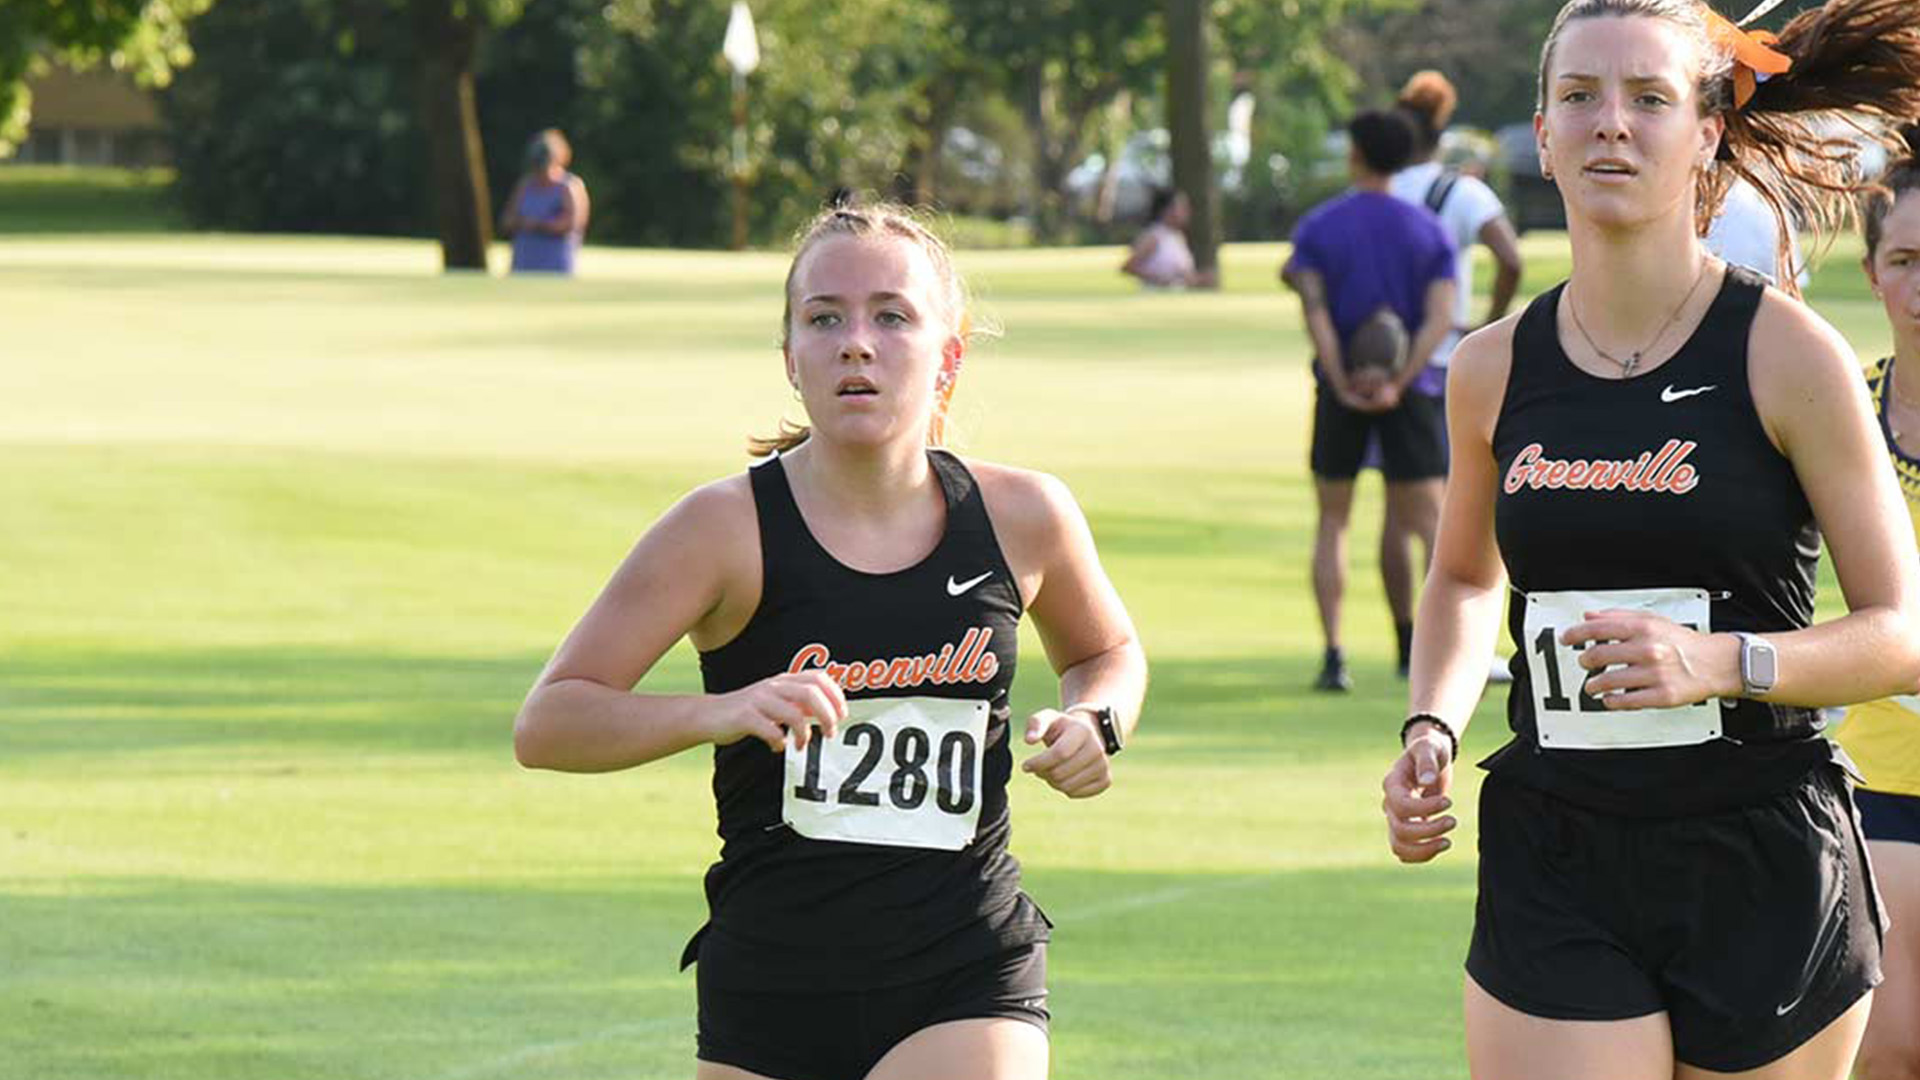 Women's Cross Country Teams Prepare for Championship